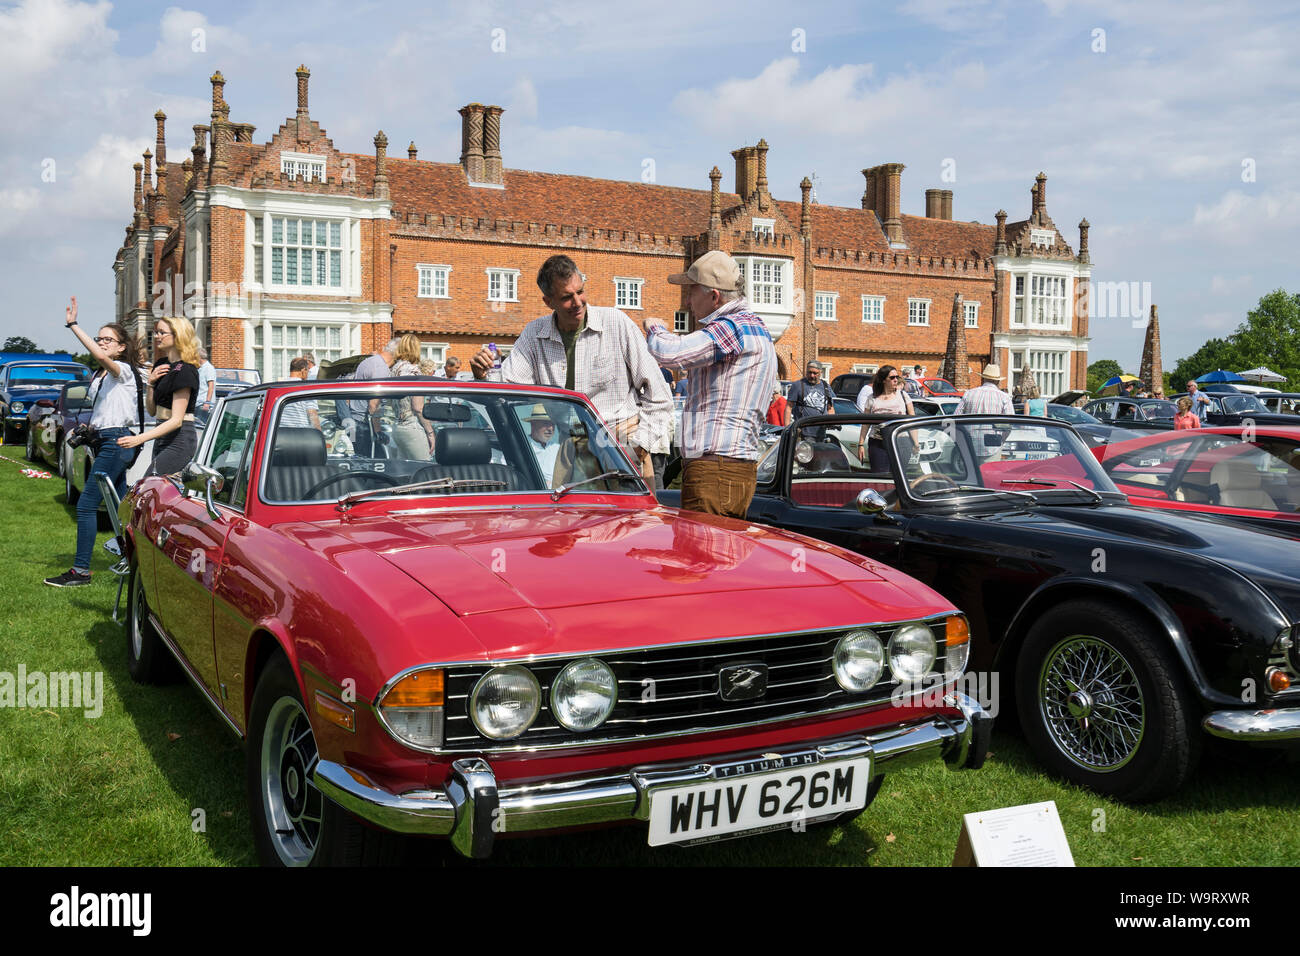 Owner and spectator discussing 1974 Triumph Stag Mk II at The Helmingham Festival of Classic & Sports Cars 2019 Stock Photo